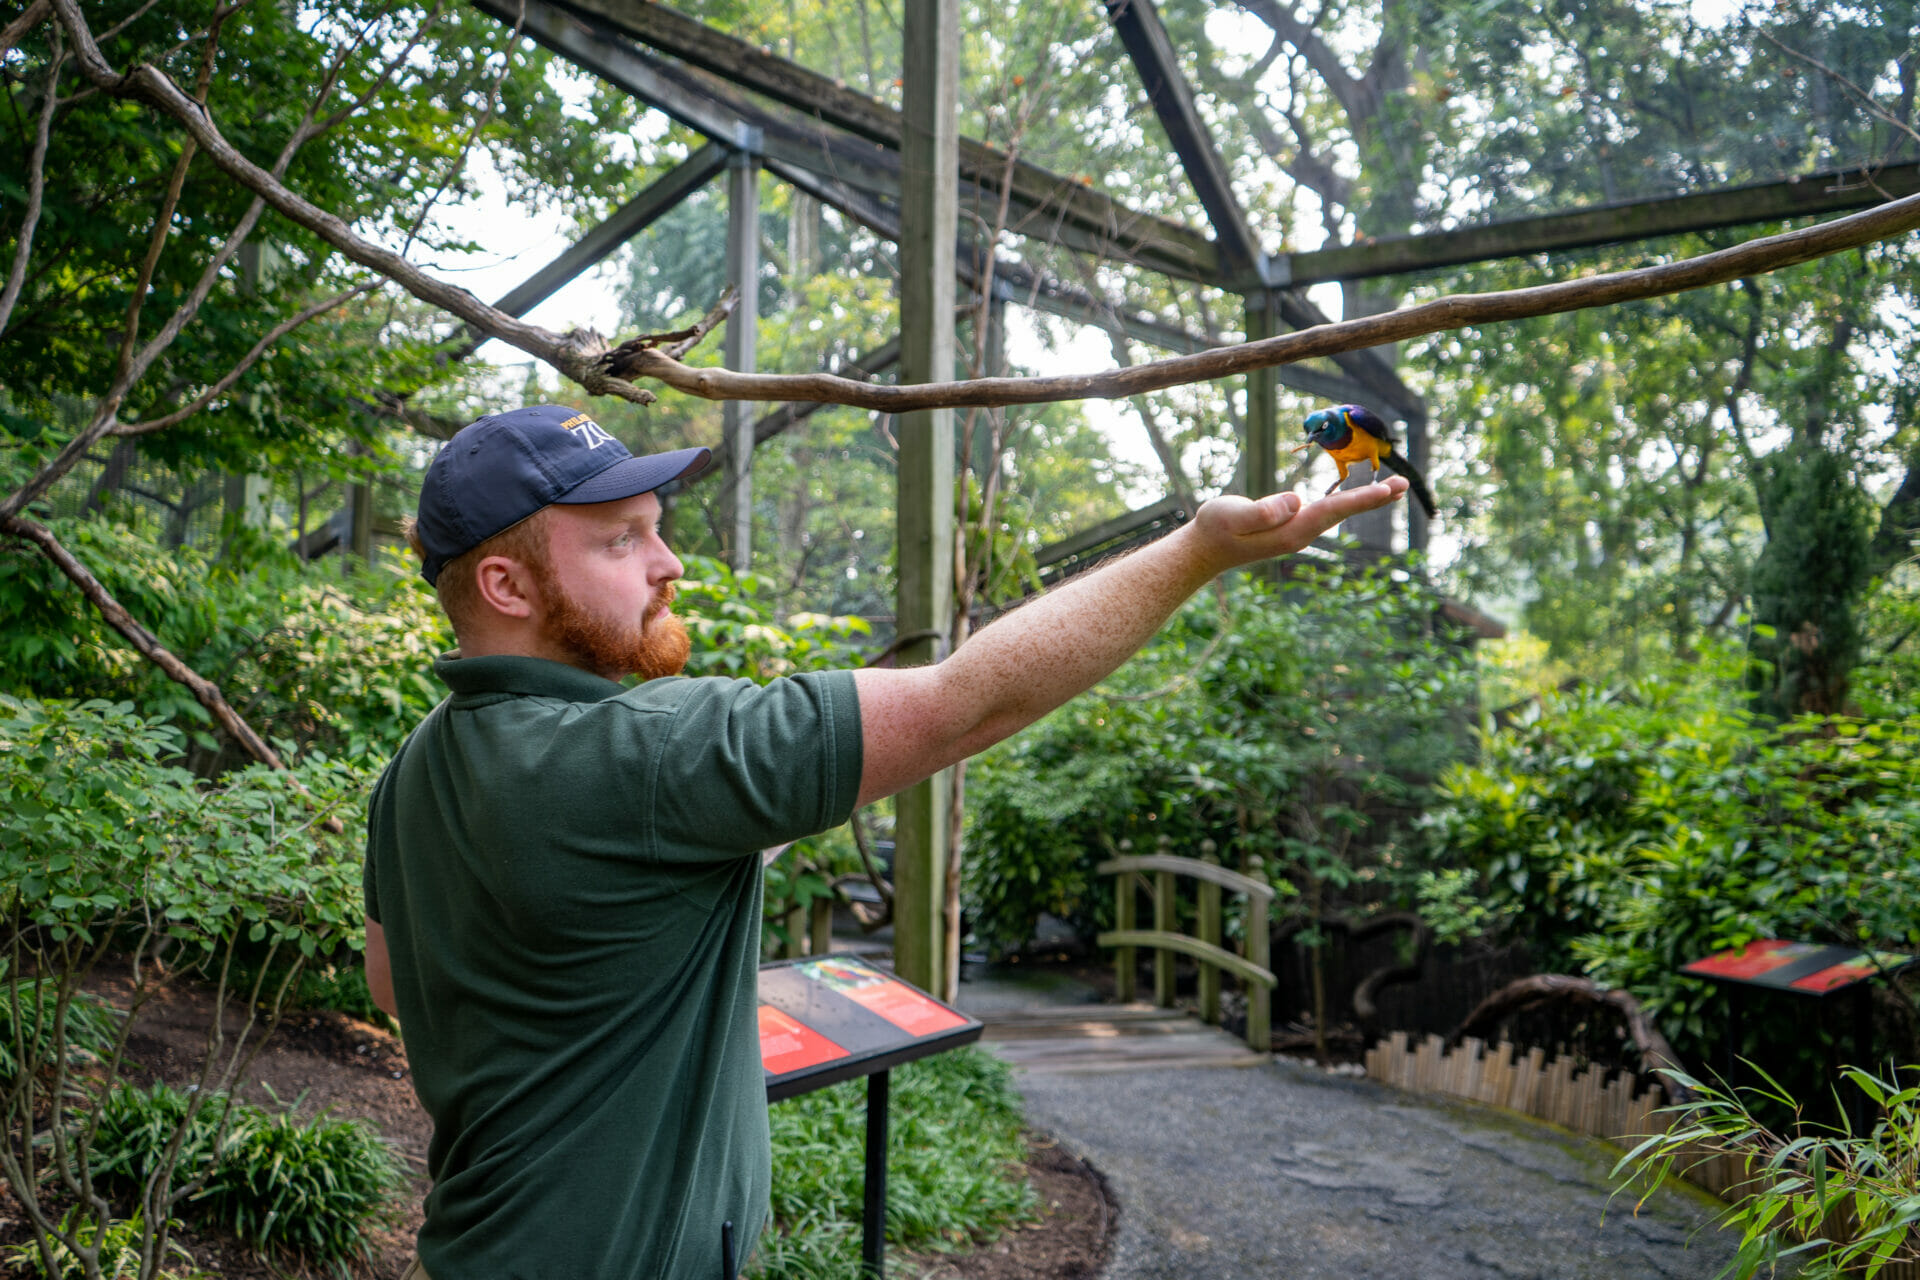 A Zoo staff member feeds a bird inside the Wings of the World attraction.